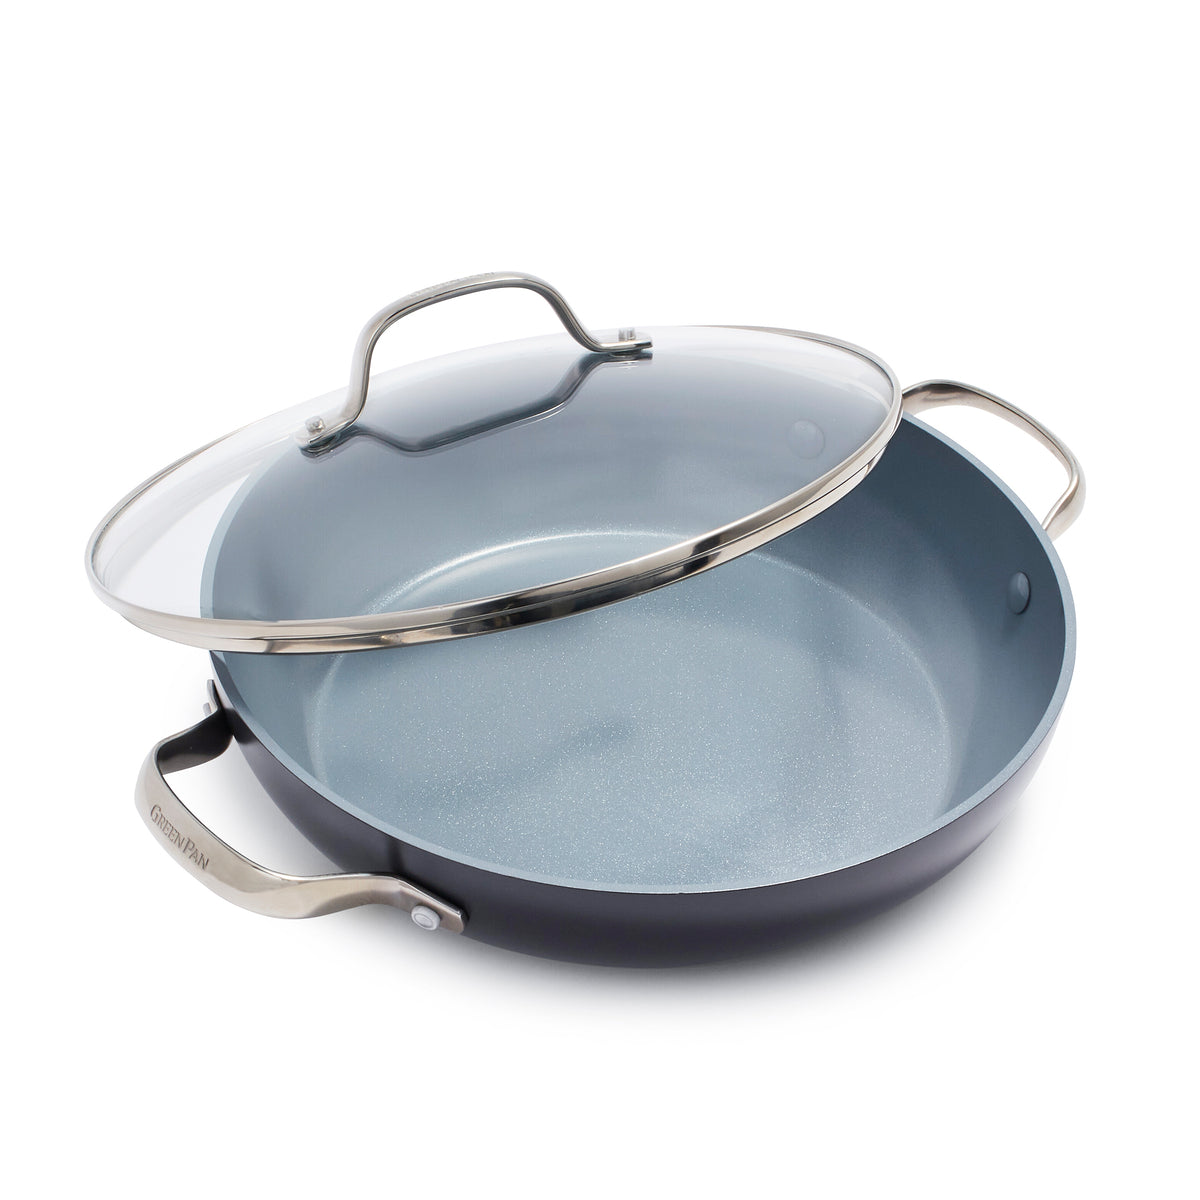 GreenPan Chatham Ceramic Nonstick 11 Everyday Pan with Lid